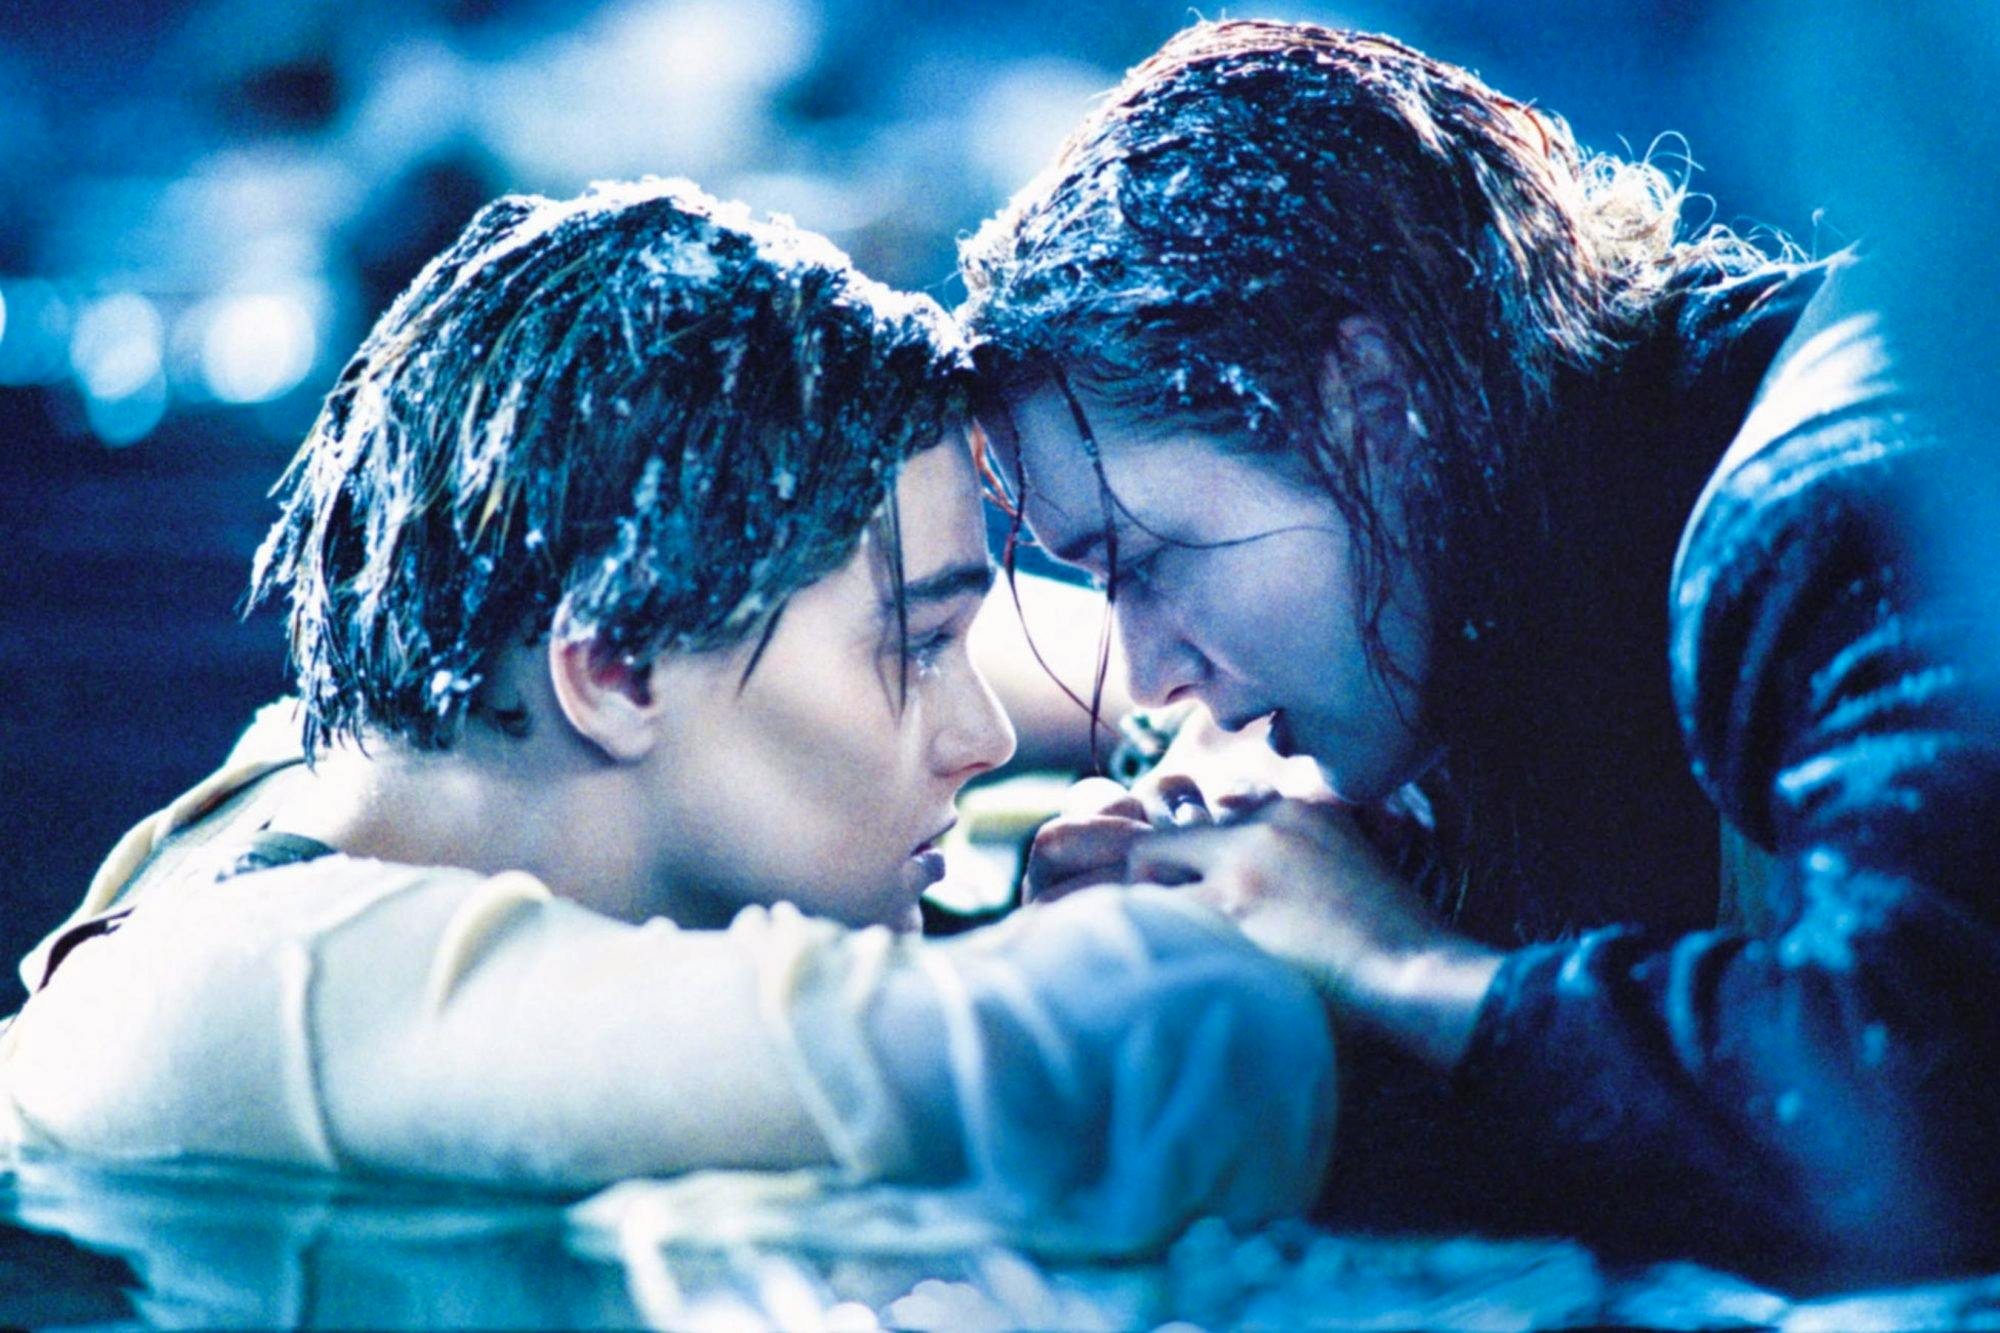 James Cameron did the experiment: Titanic's Jack probably wouldn't